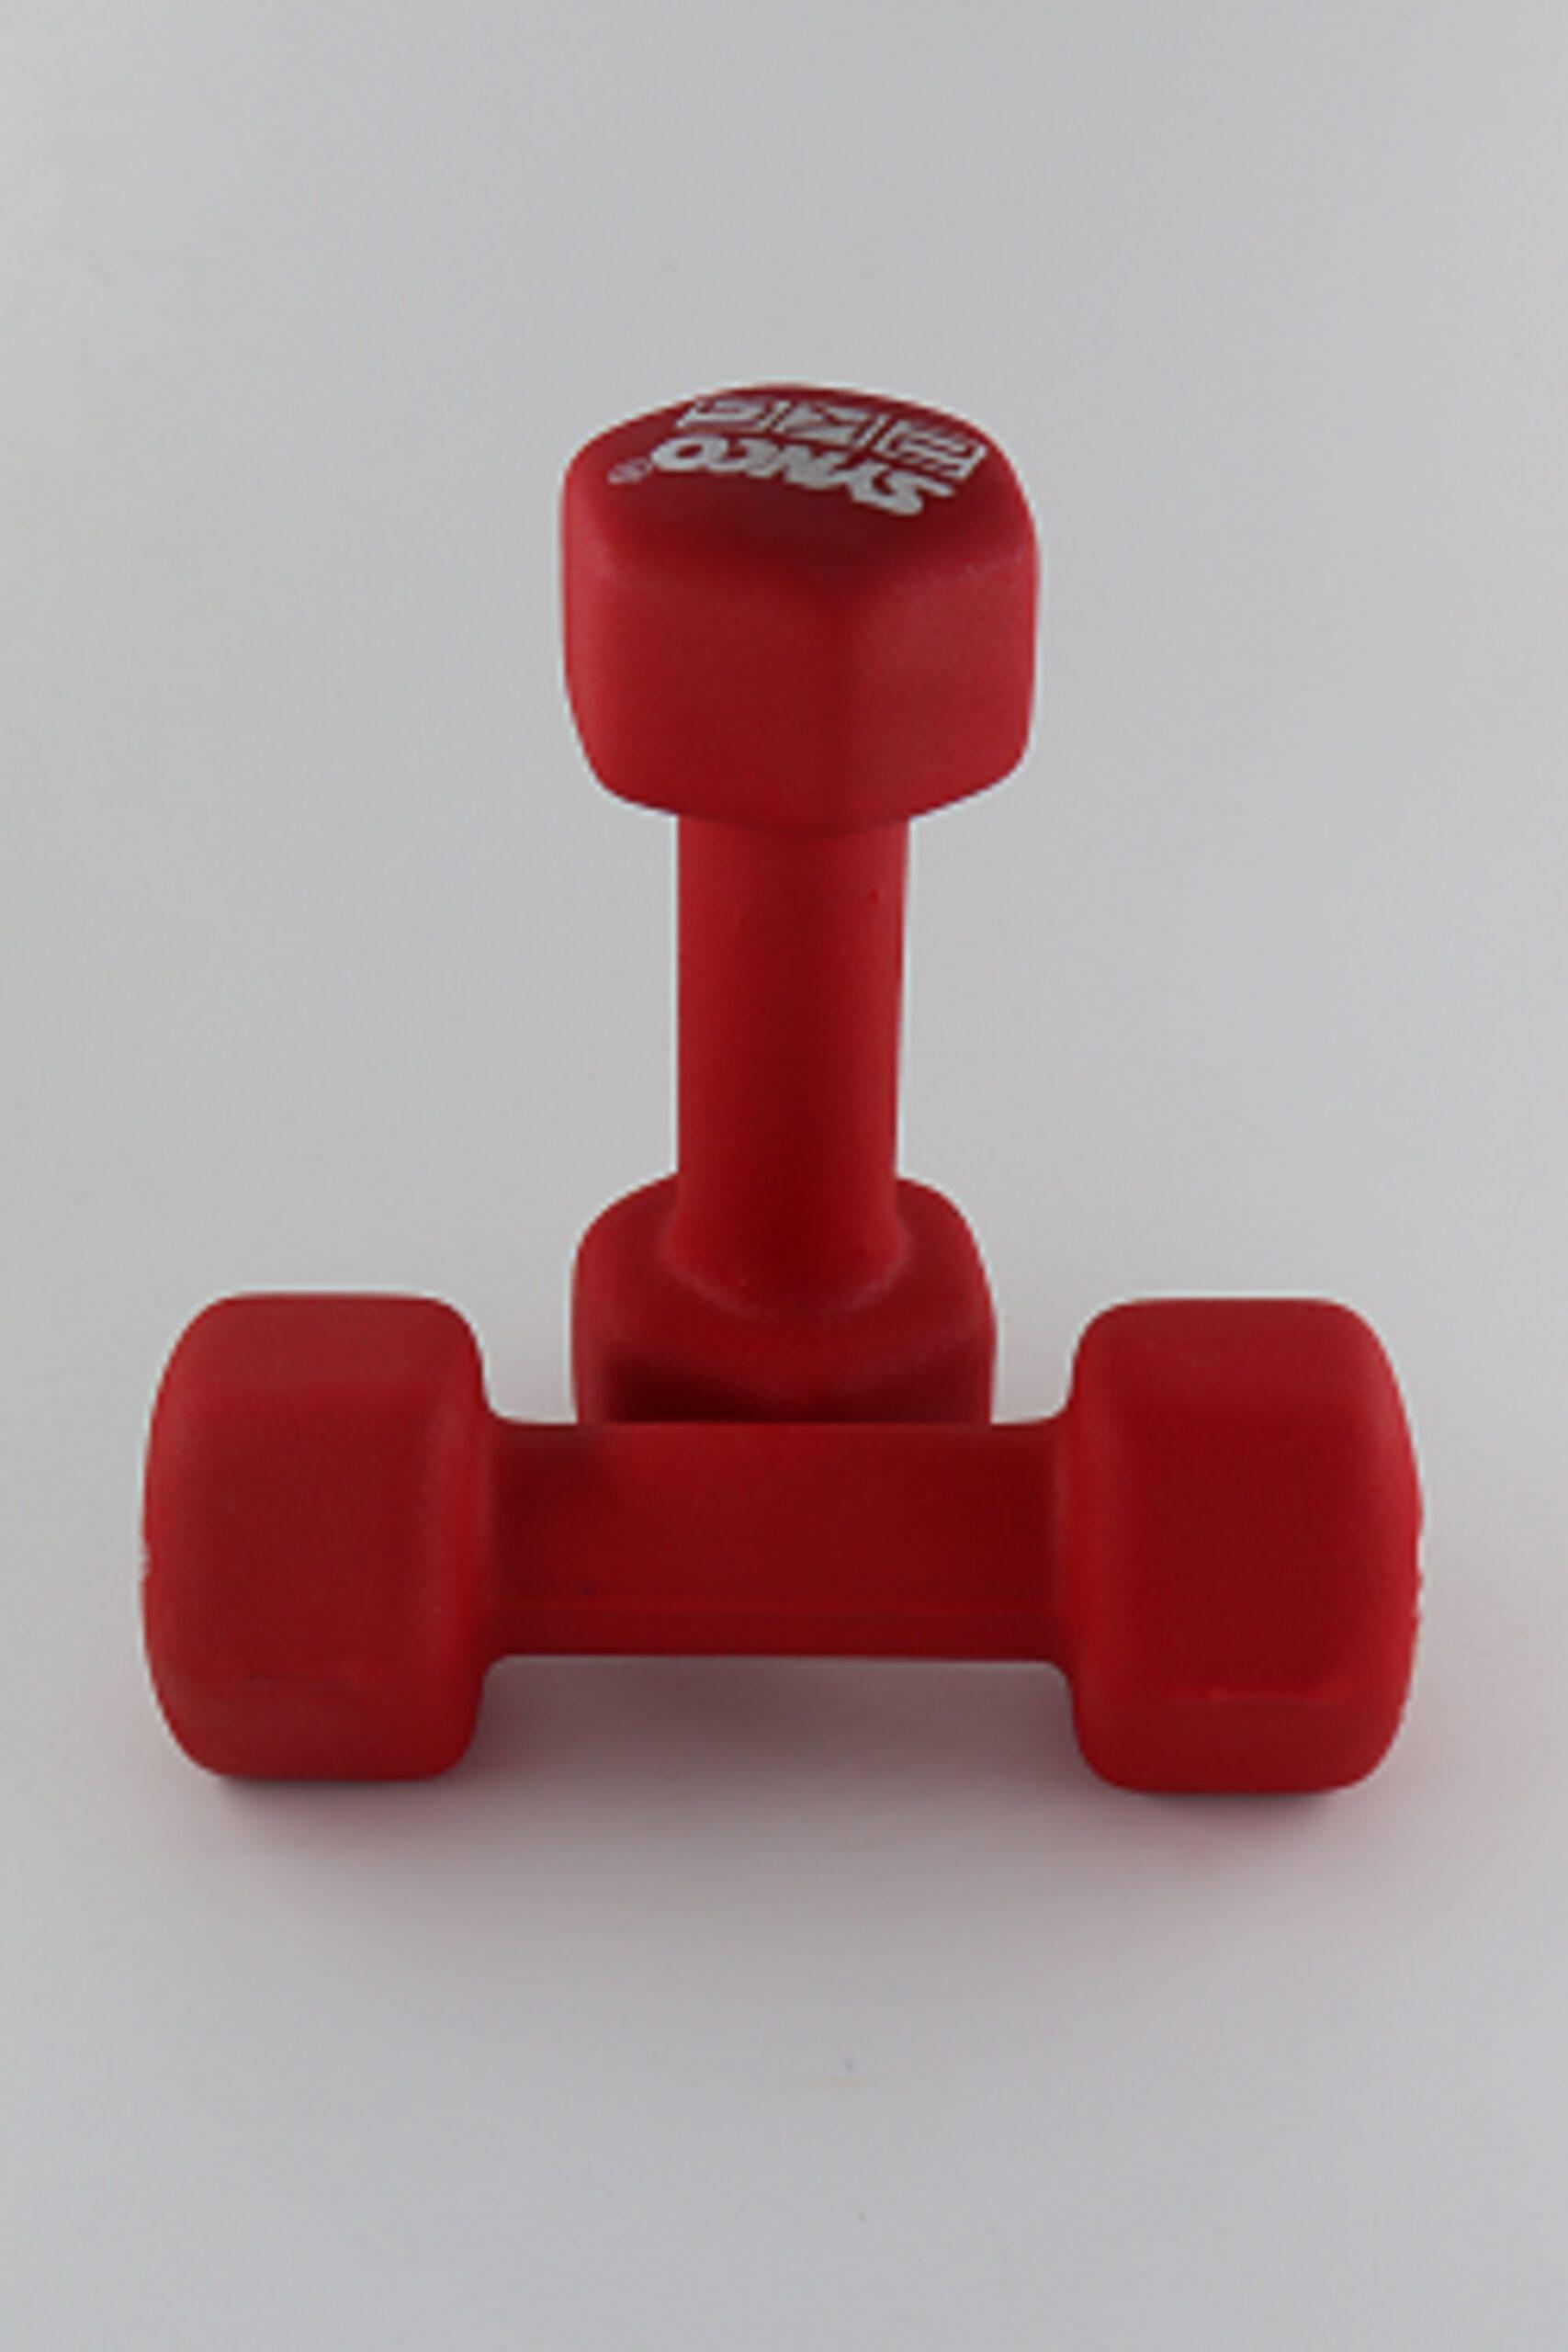 Synco Red Dumbbell Pair (2 x 2 KG) - 3